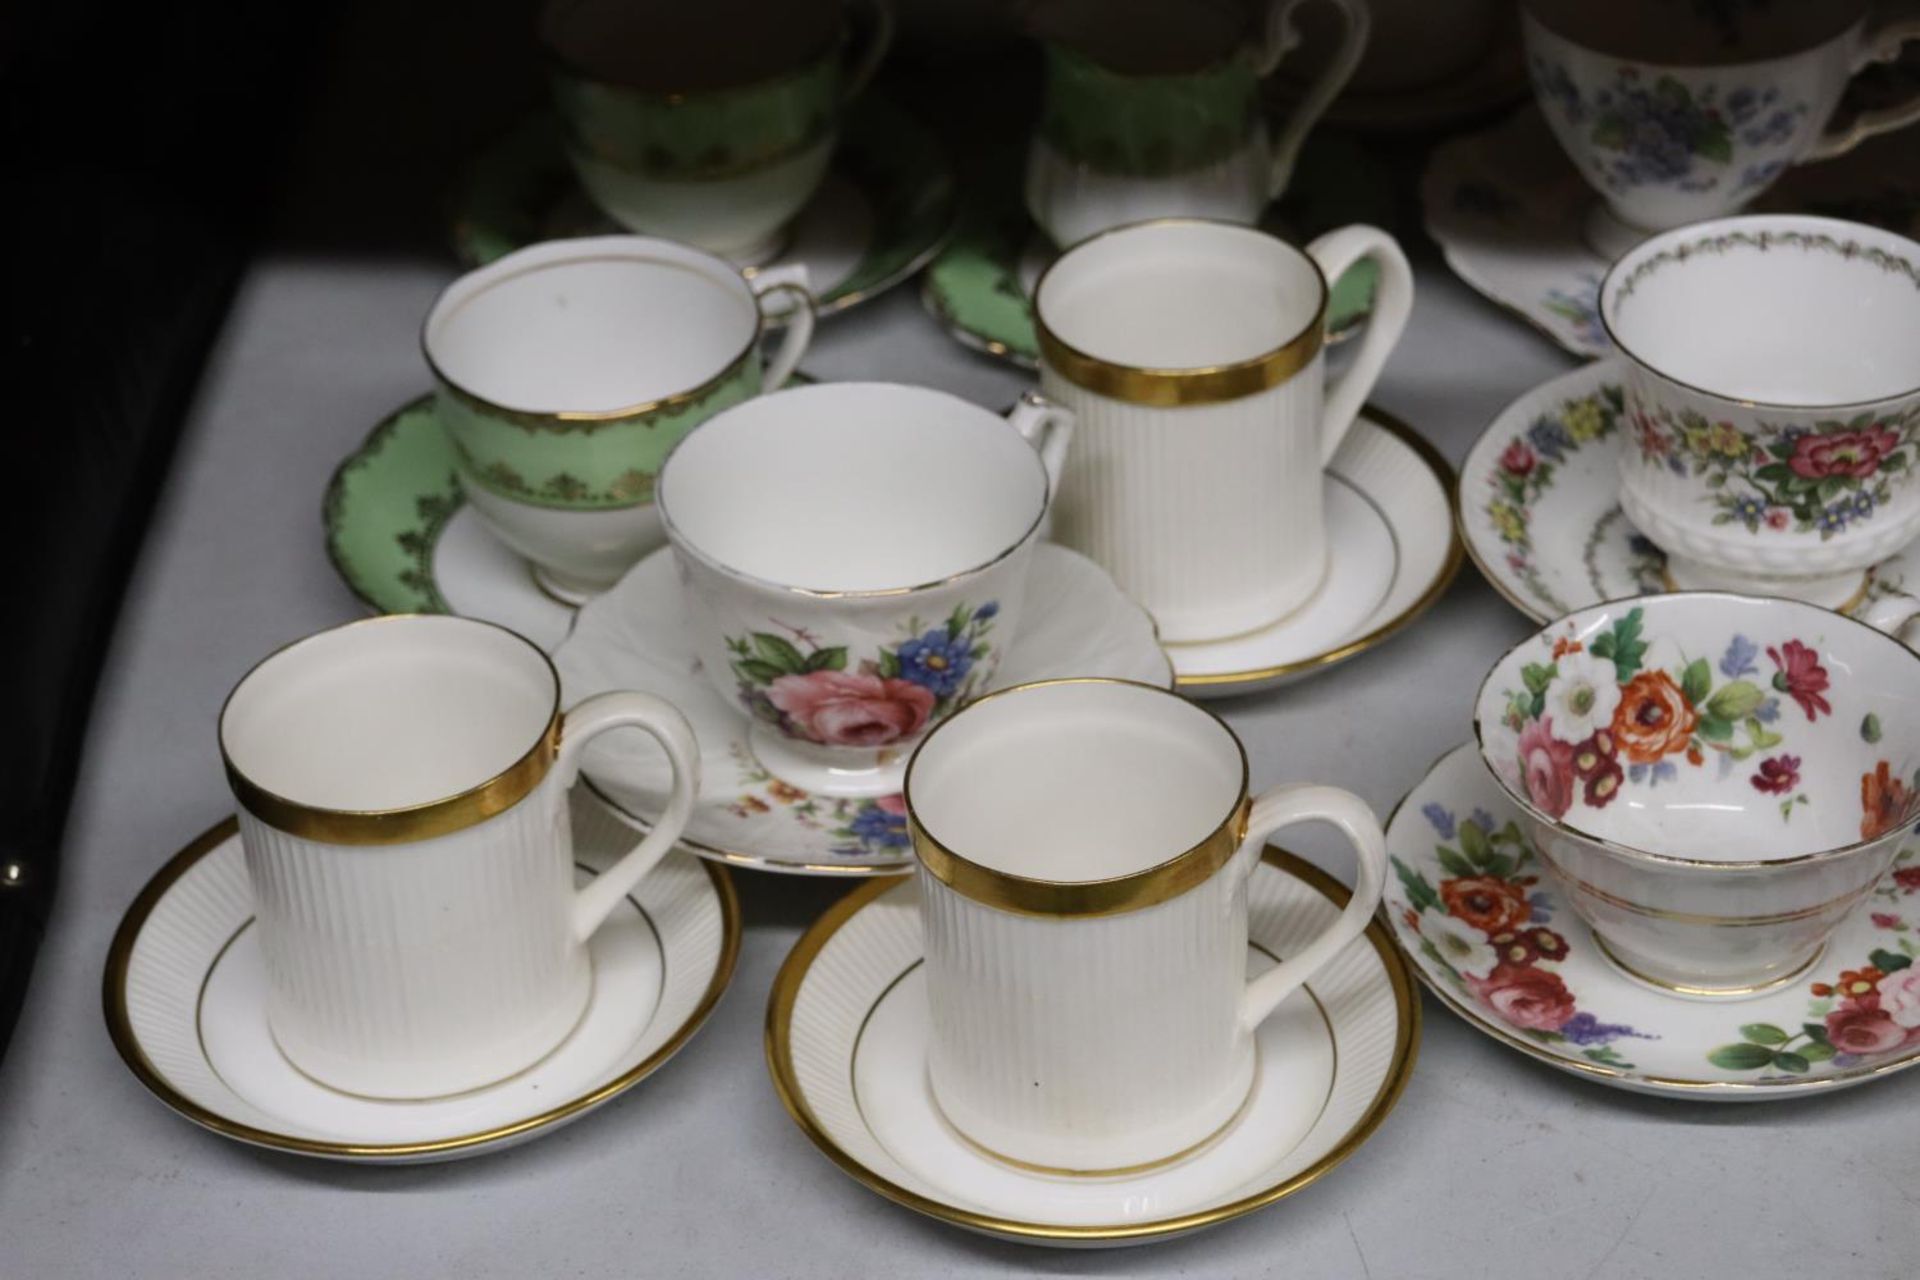 A LARGE QUANTITY OF VINTAGE CUPS, SAUCERS, PLATES, ETC TO INCLUDE ROYAL WORCESTER 'ABLA', CROWN - Image 2 of 5